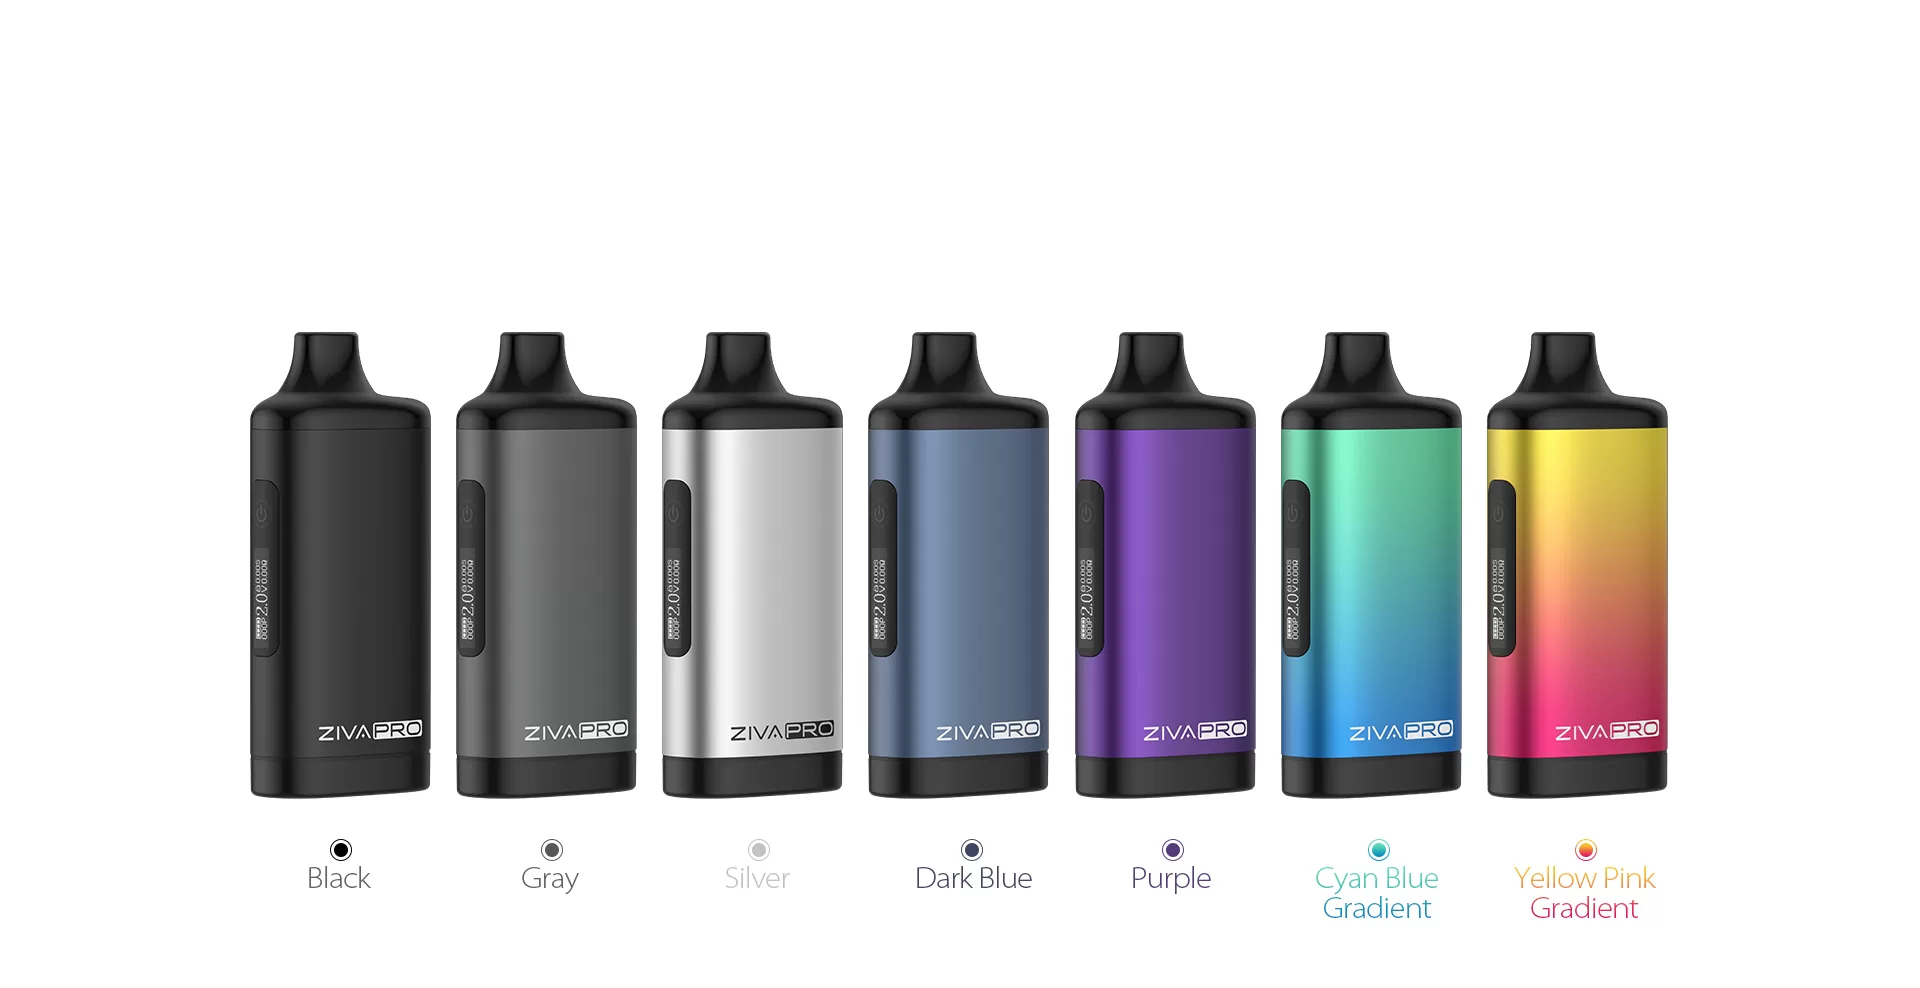 Yocan Ziva Pro various color options